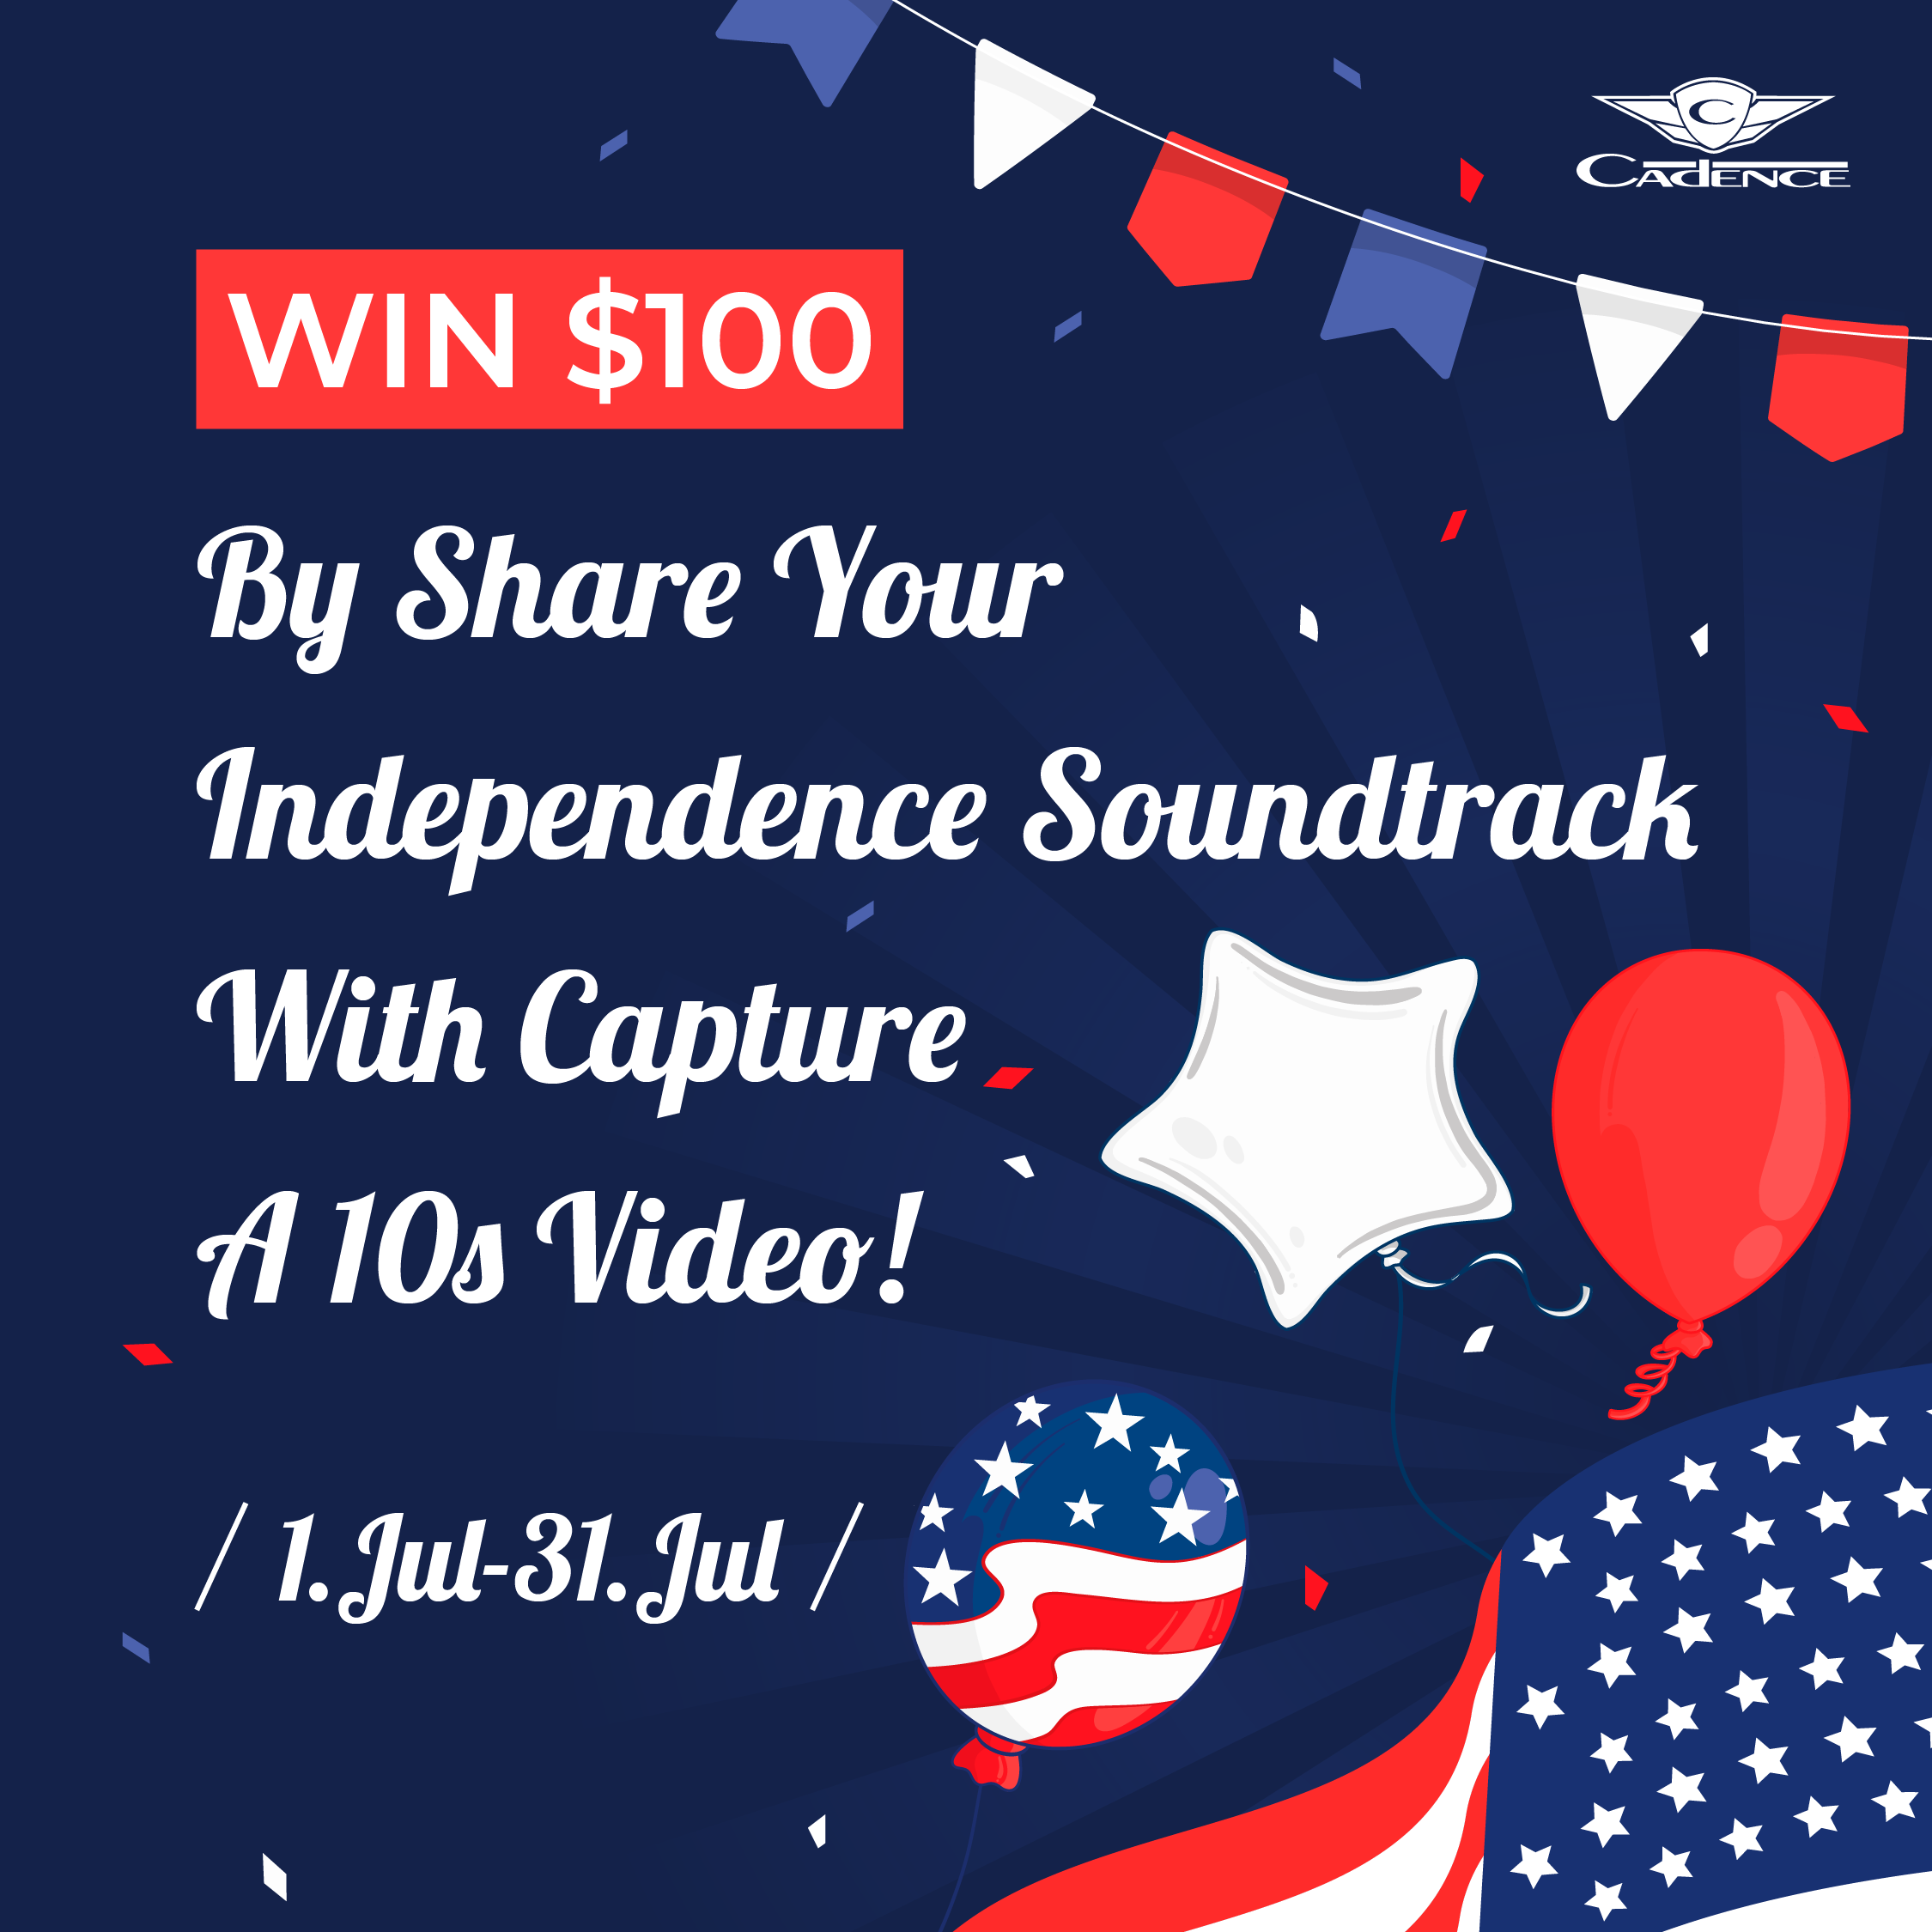 Share Your Independence Soundtrack and Win $100!